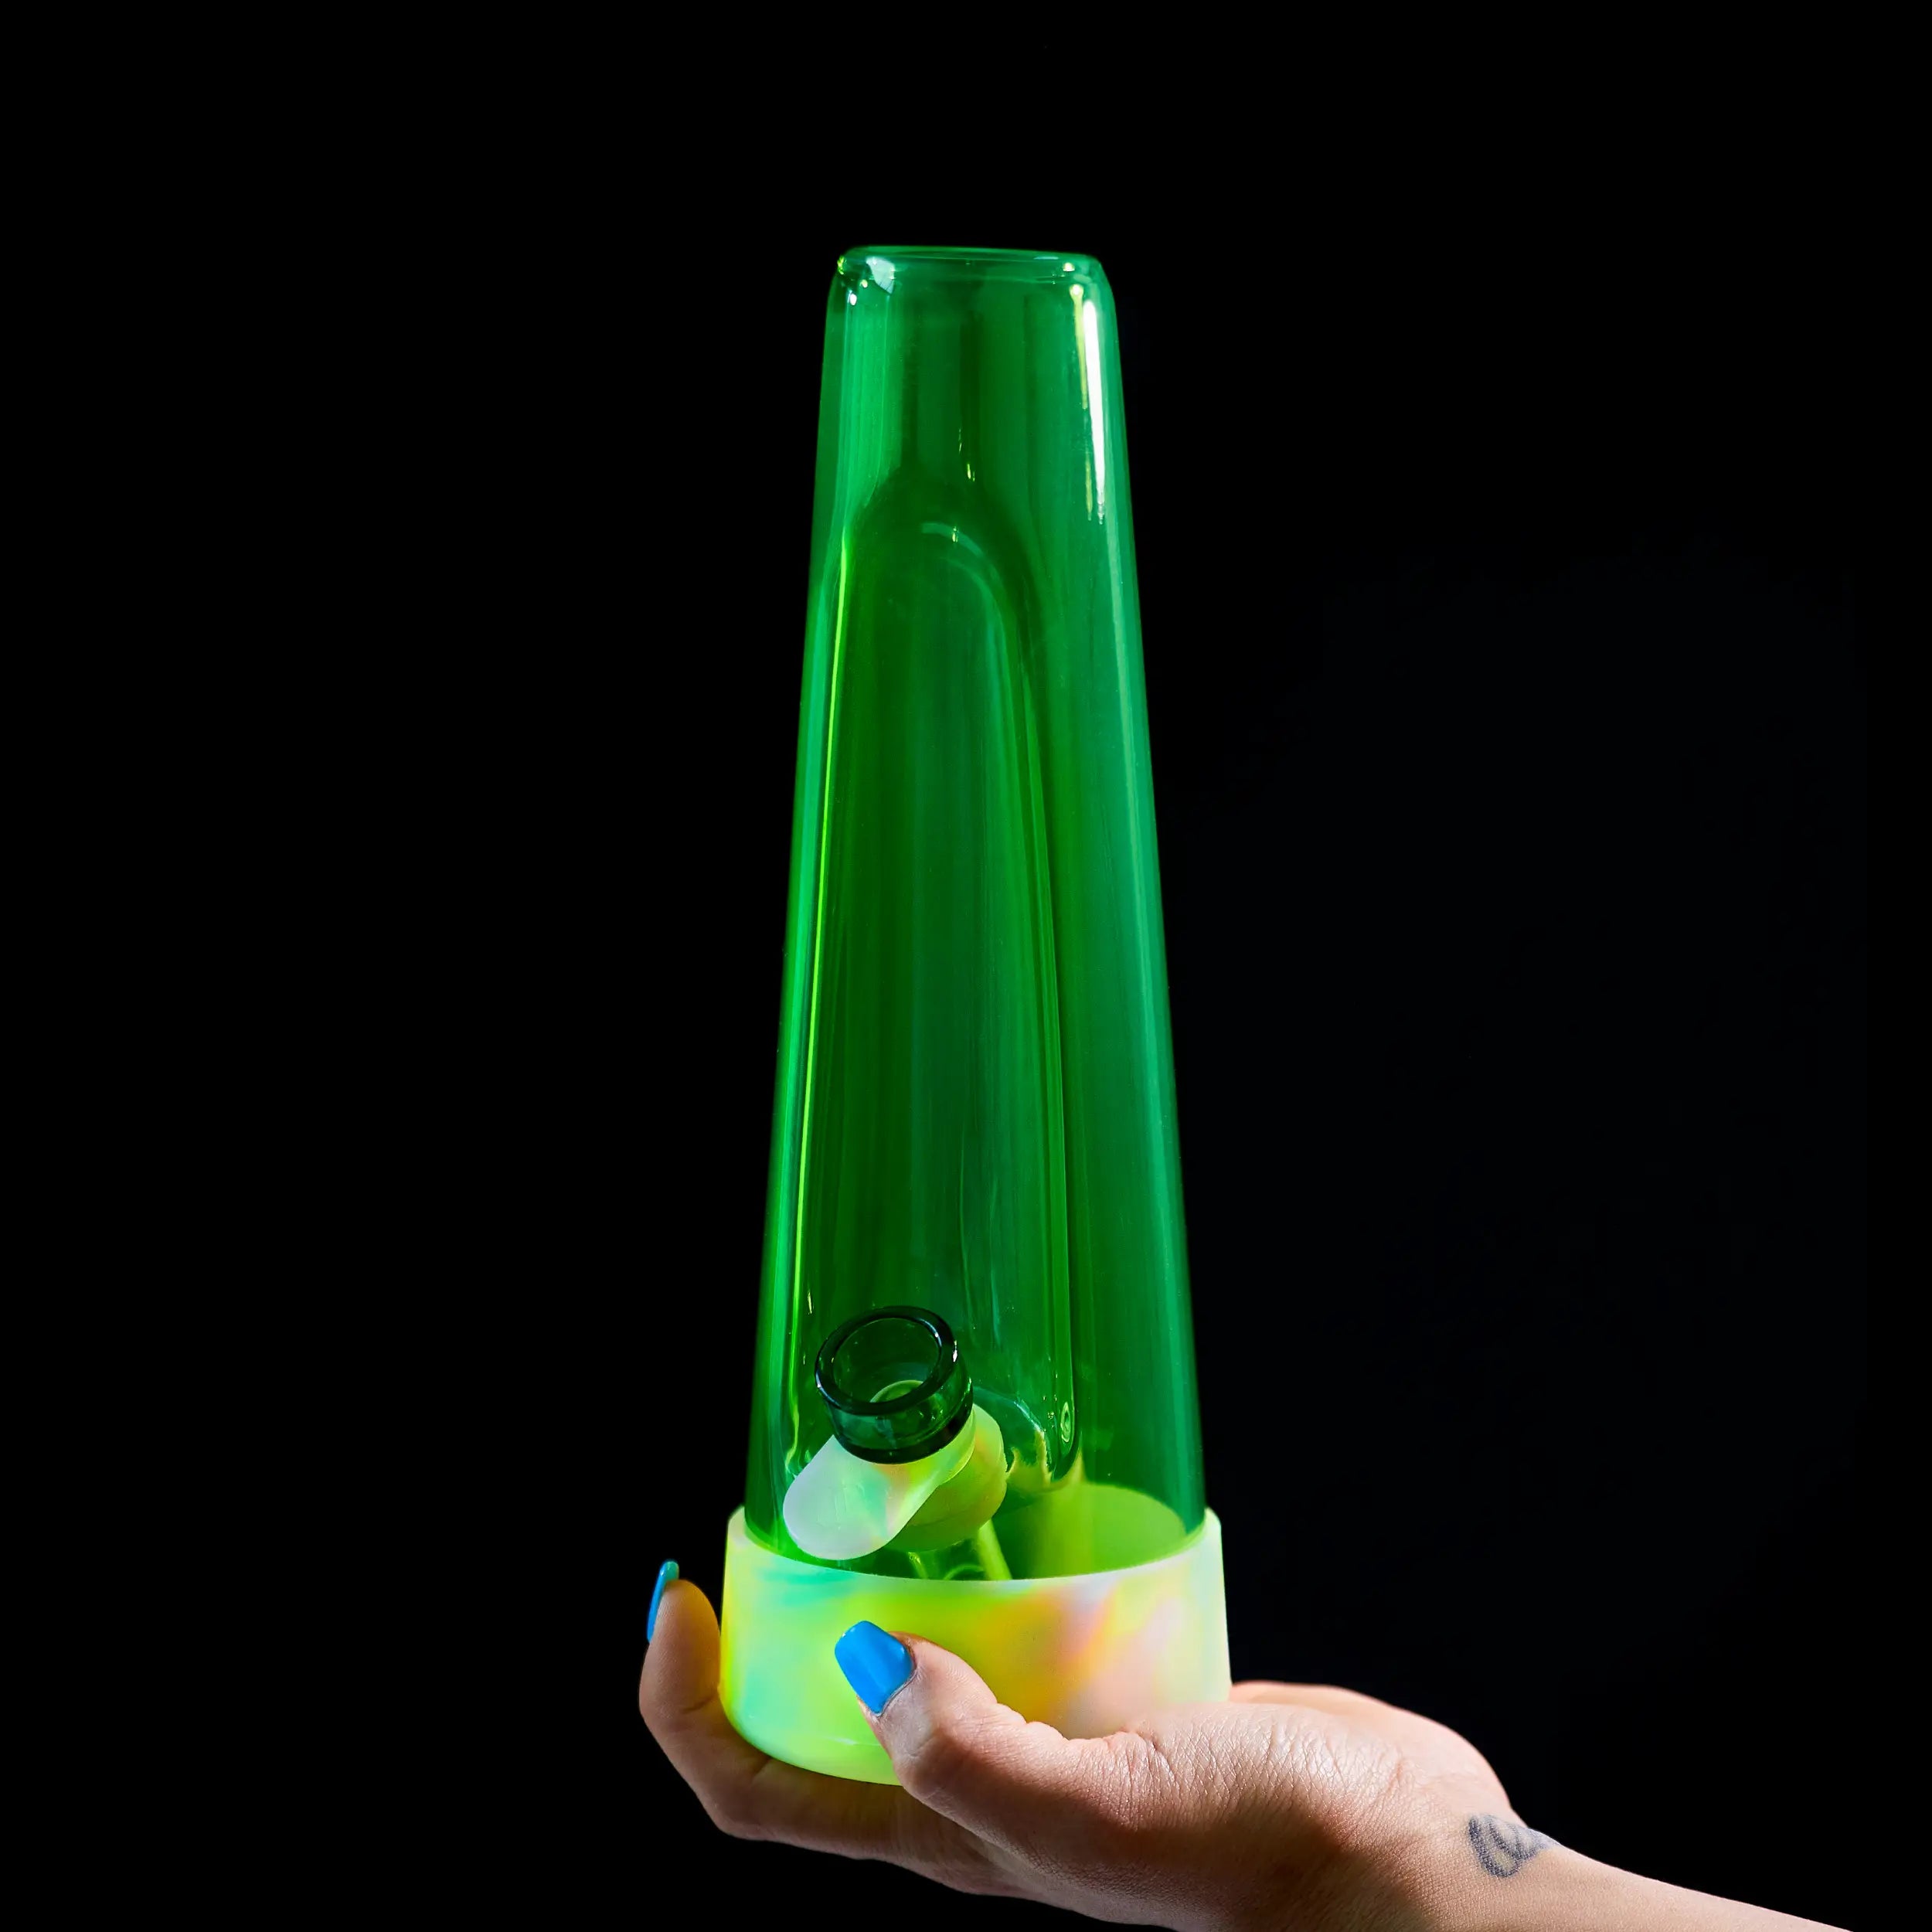 Session Goods Glow Green Bong and Pipe Set: Illuminate Your Sessions.